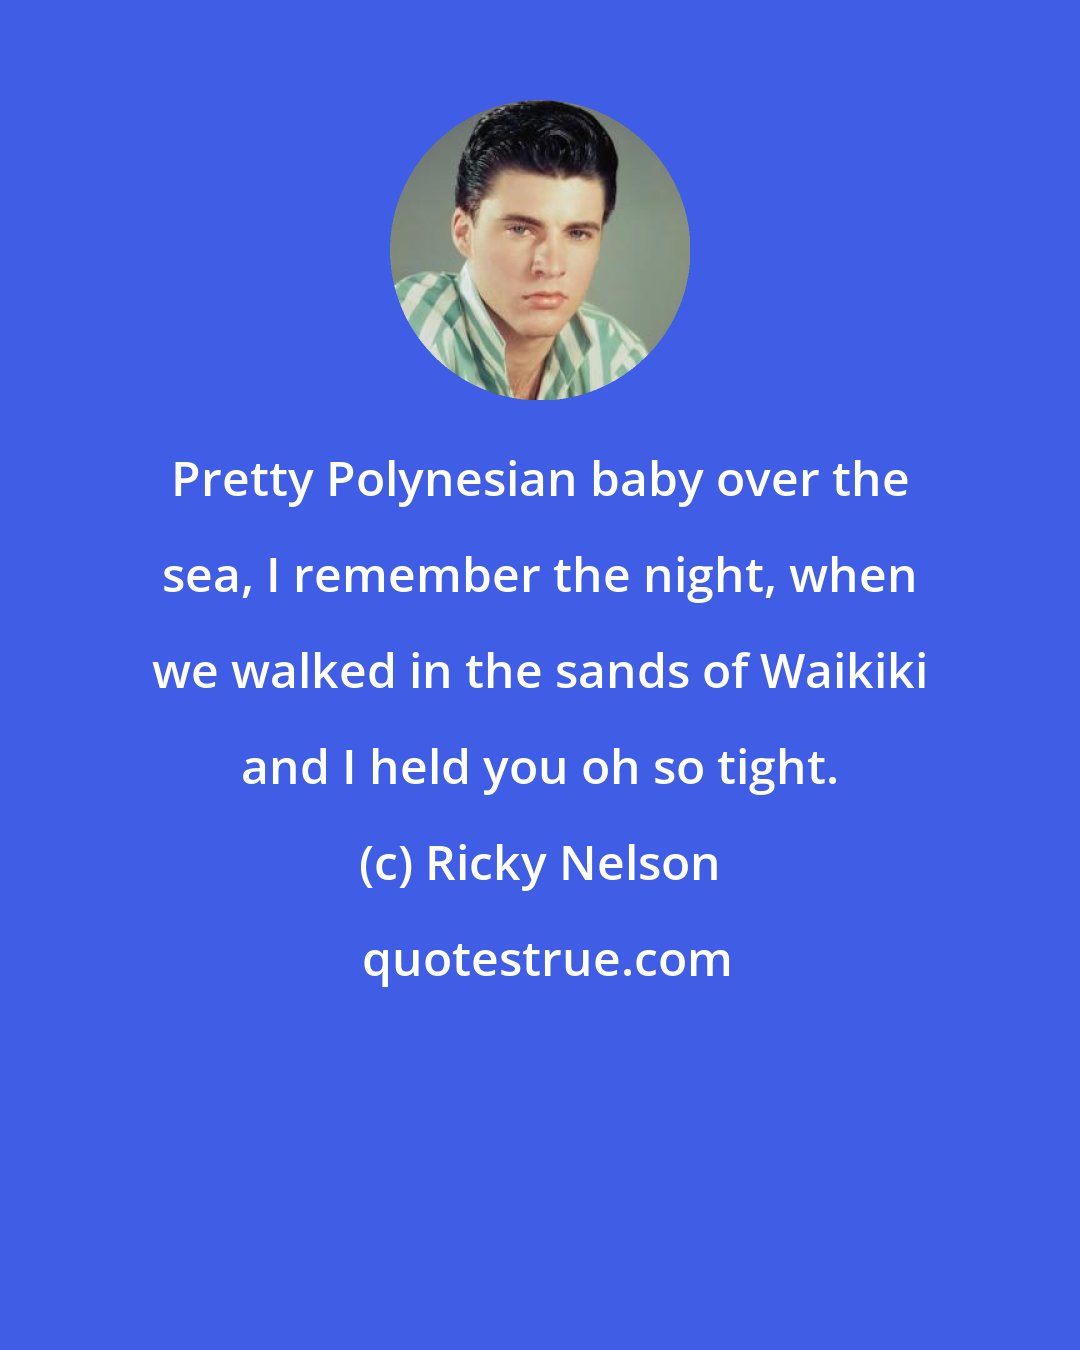 Ricky Nelson: Pretty Polynesian baby over the sea, I remember the night, when we walked in the sands of Waikiki and I held you oh so tight.